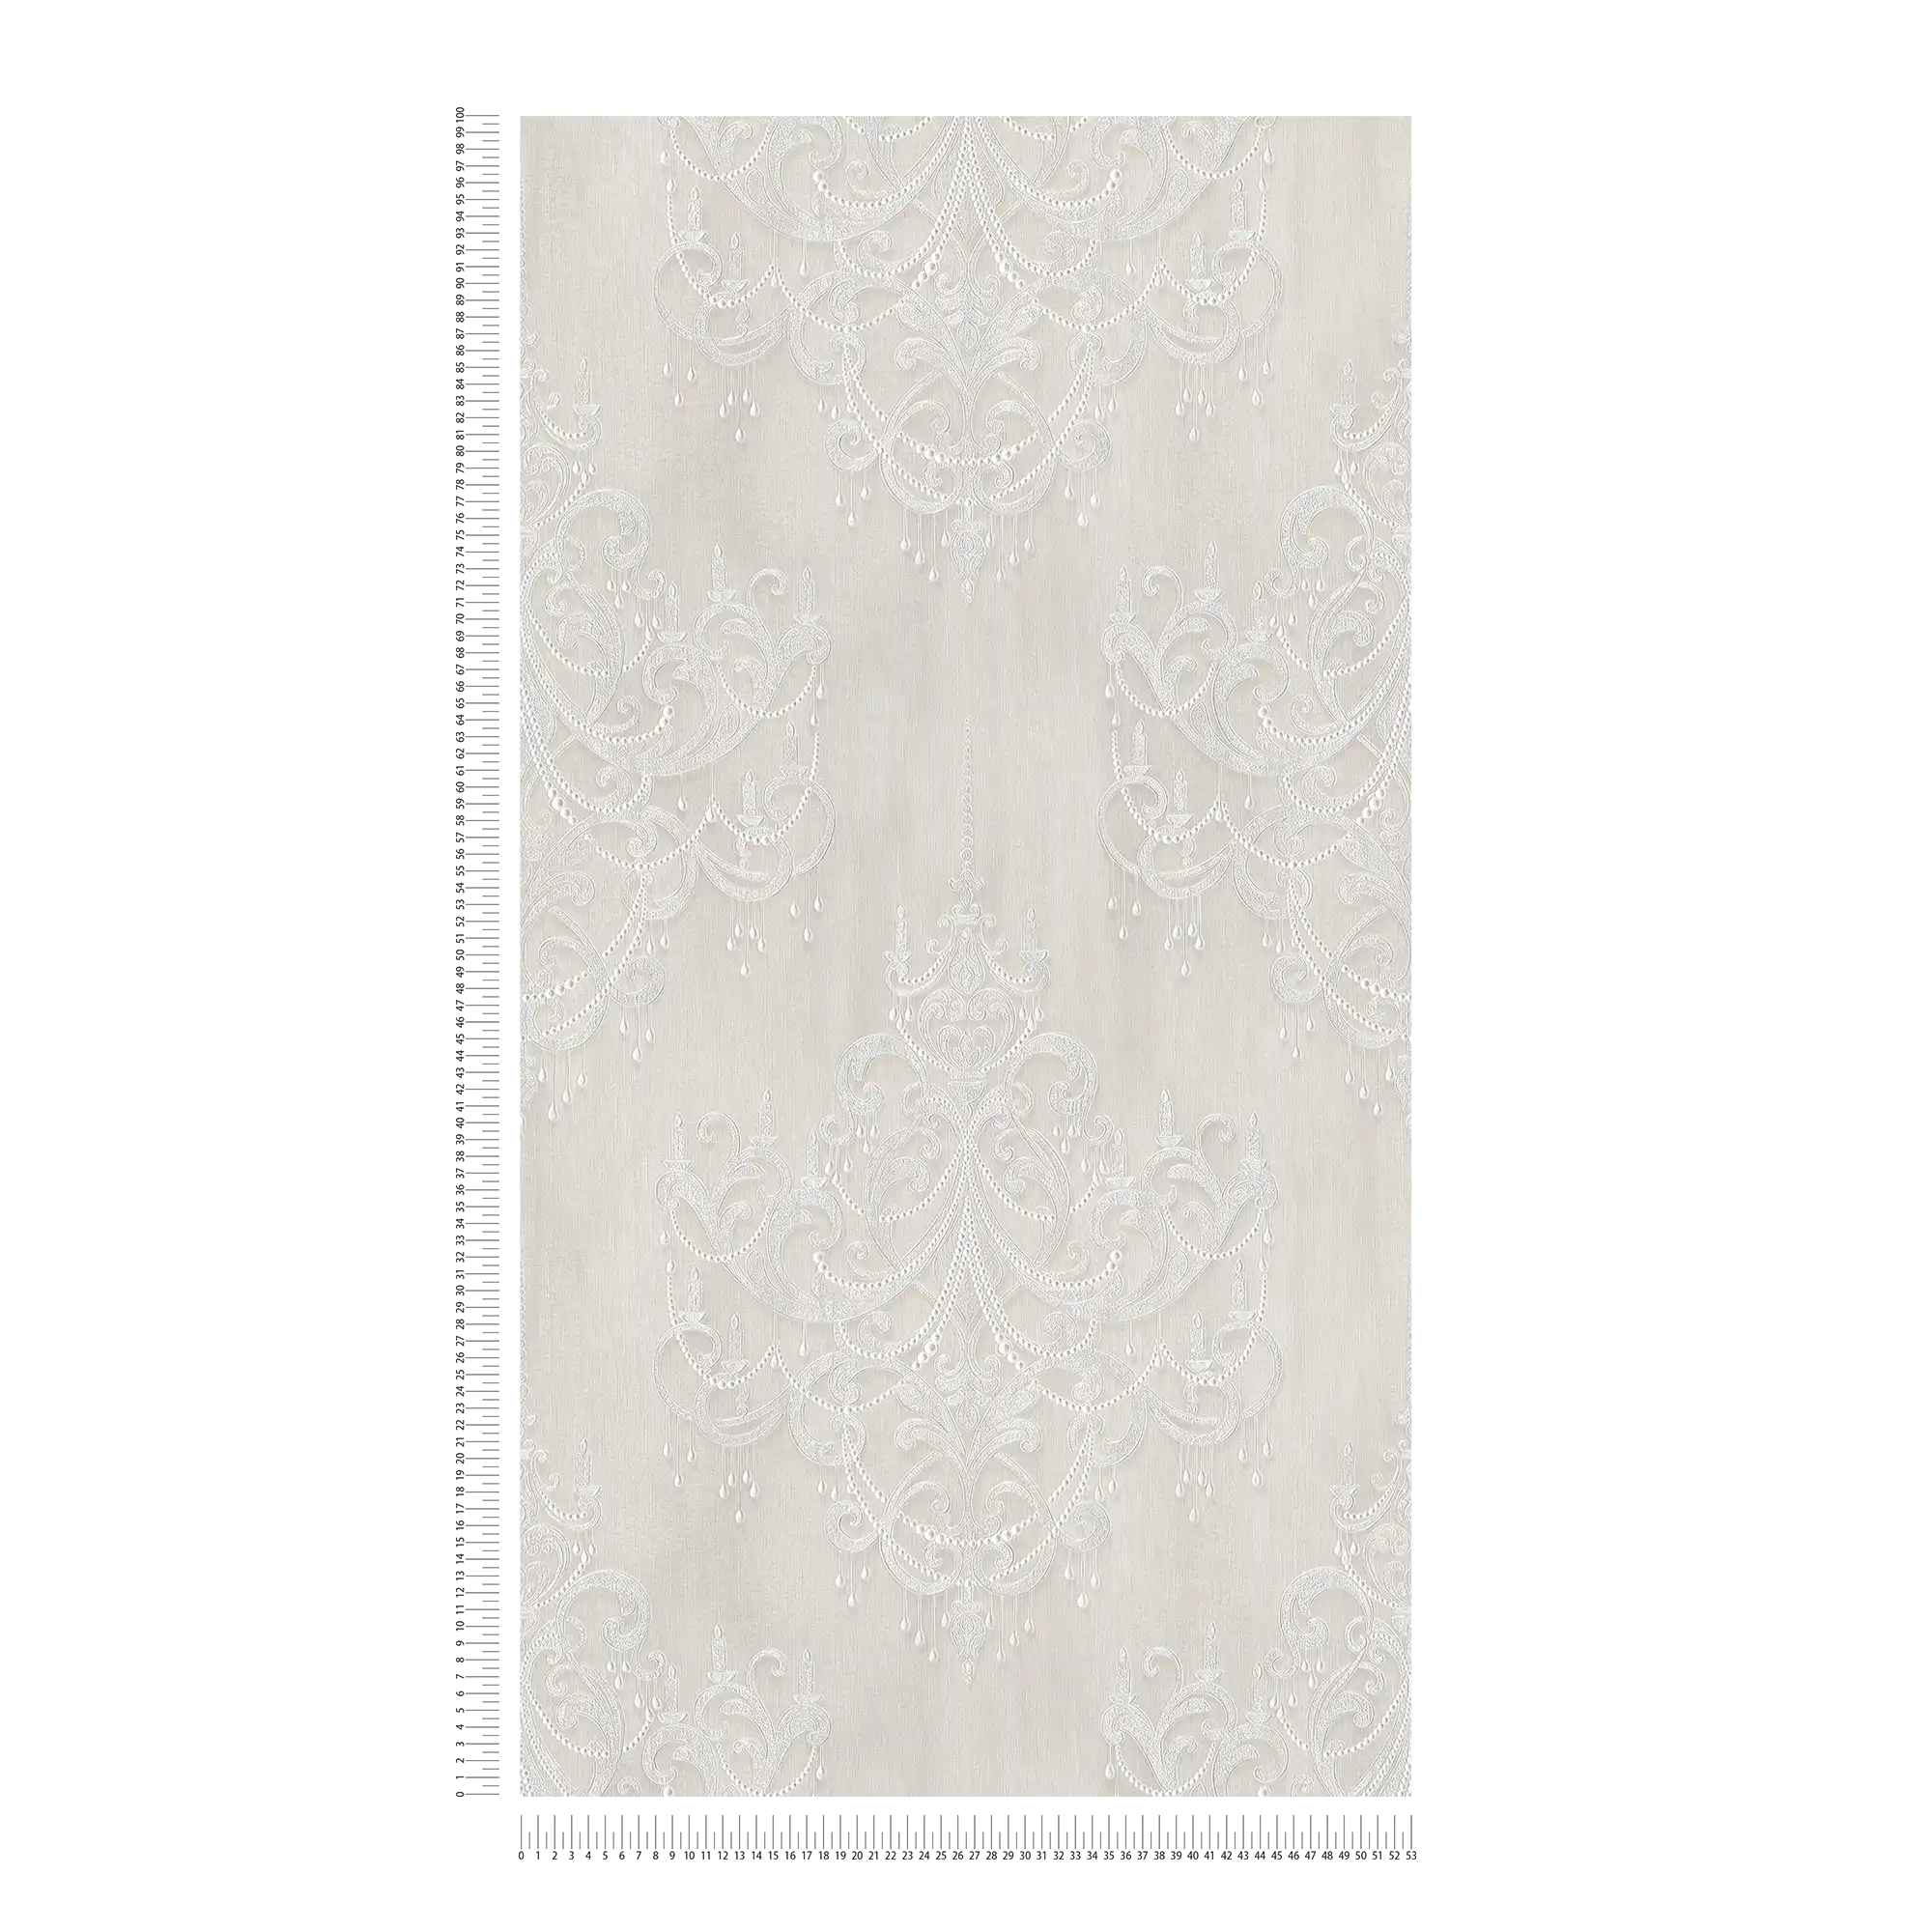             Ornament Tapete Champagner mit Perlenmuster – Creme
        